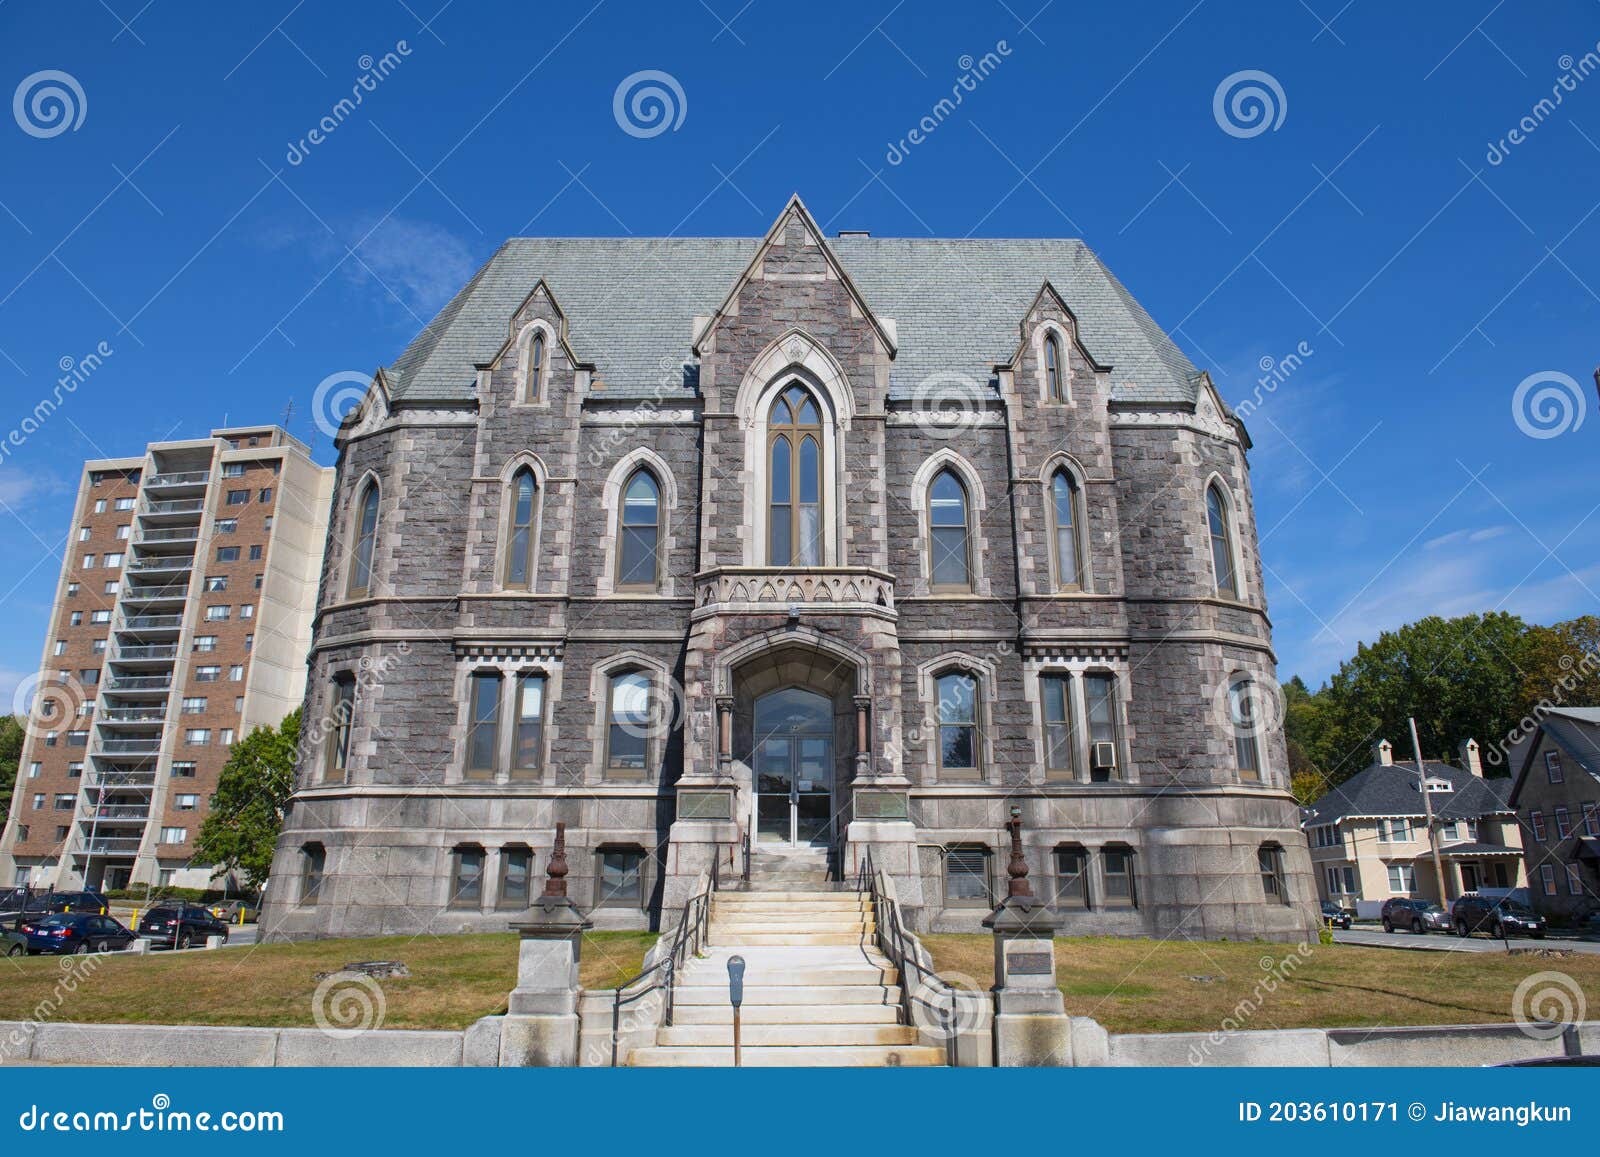 worcester county courthouse, fitchburg, massachusetts, usa